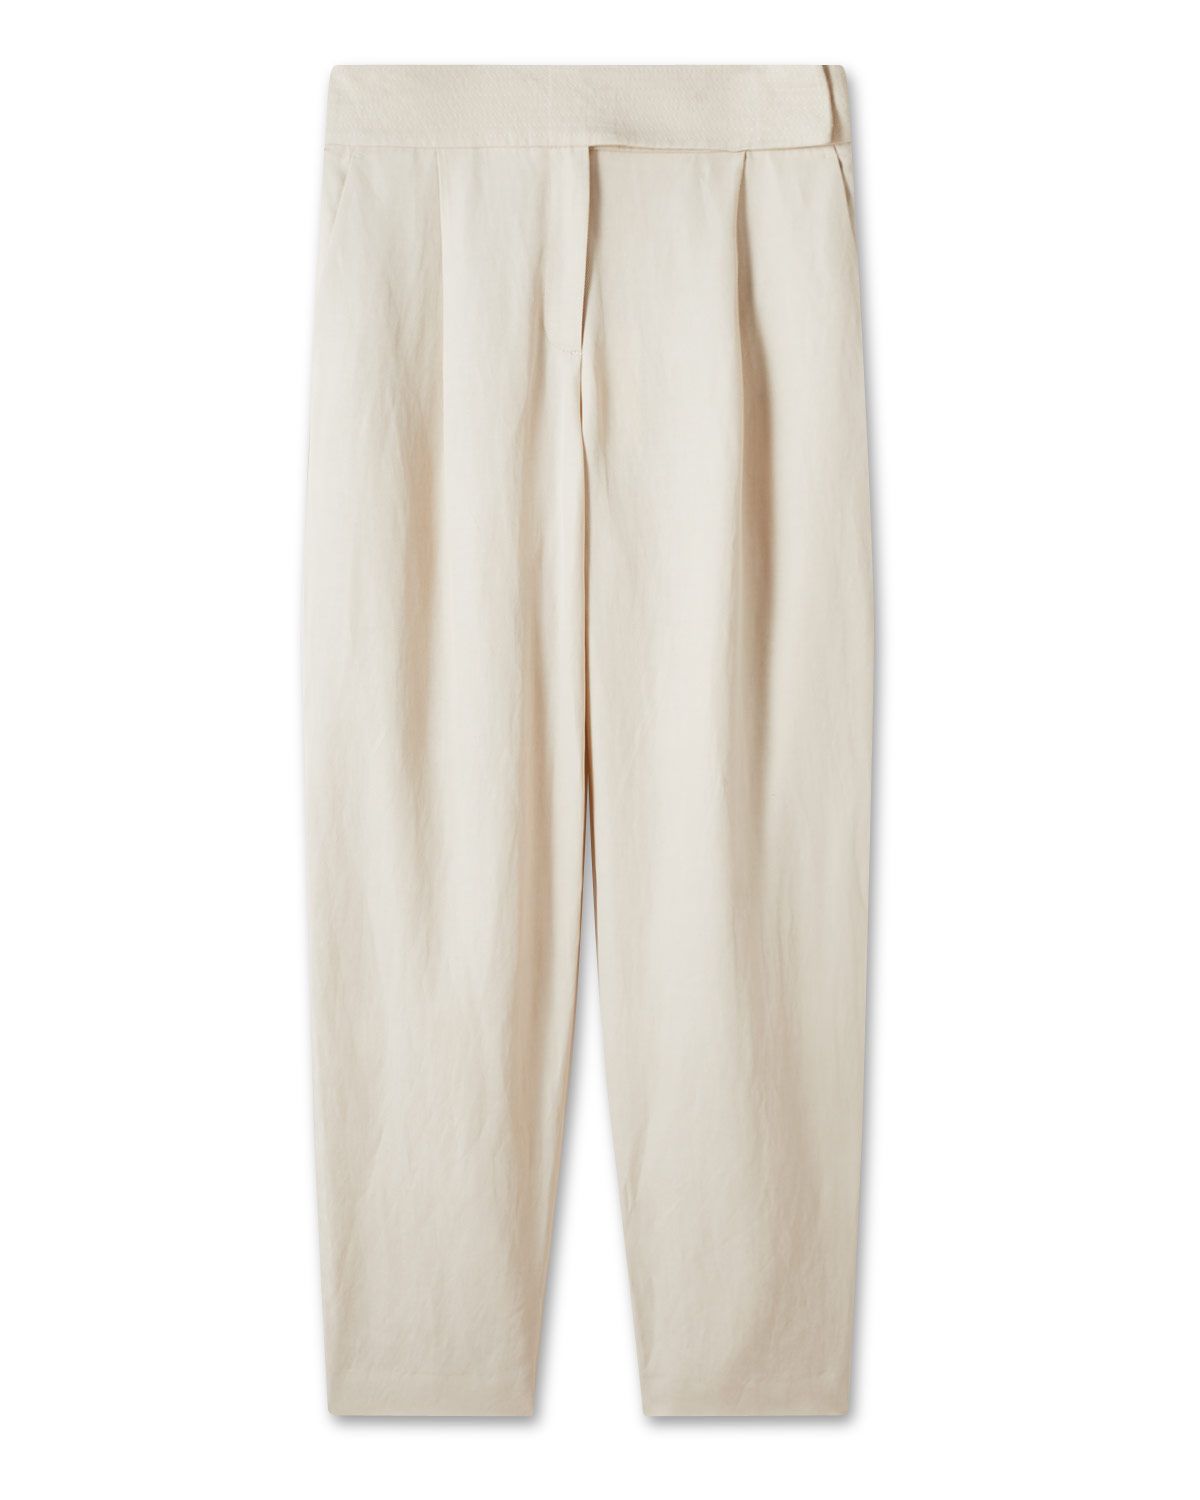 Italian linen trousers. Slightly wider at the thigh. Narrow and multi-stitched hem. Subtle textural twills for fluid effect.